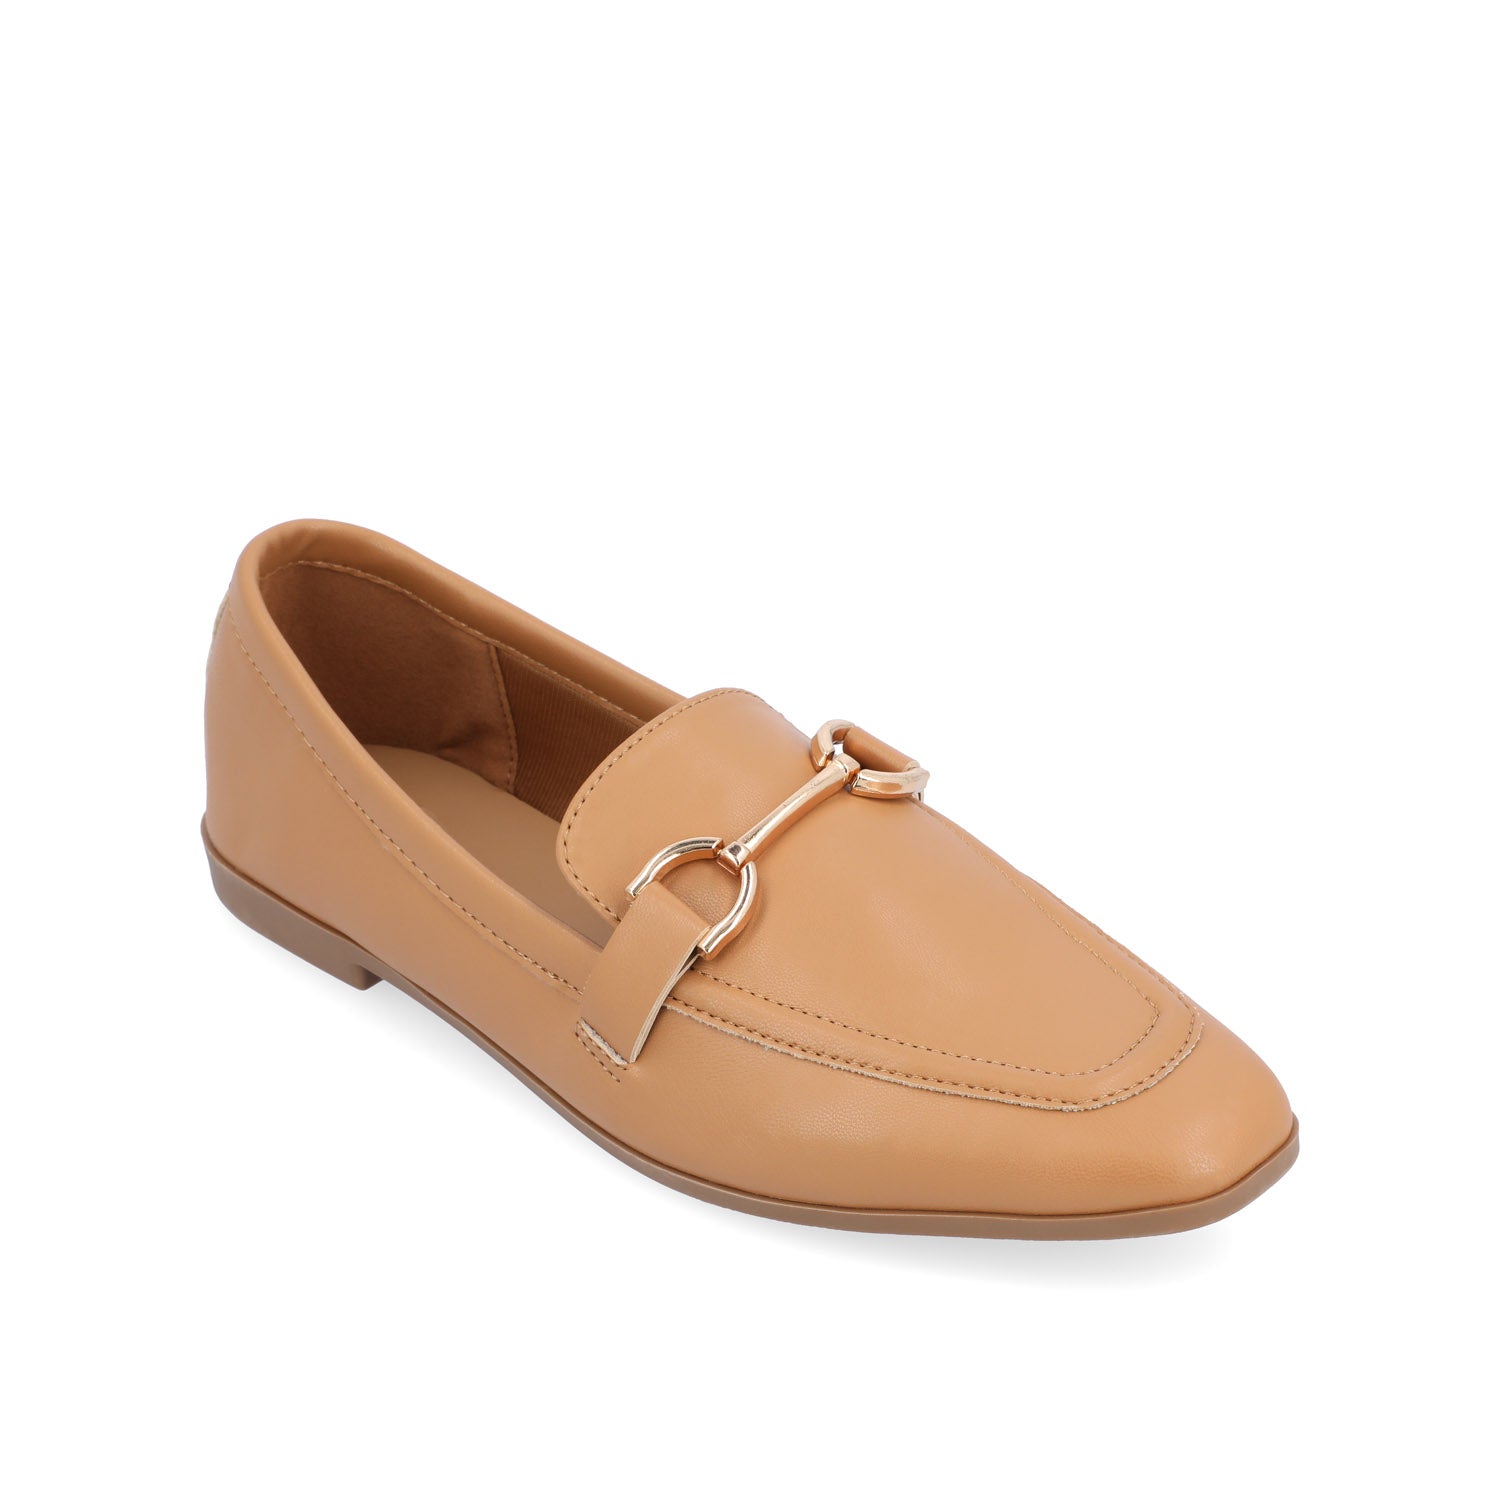 MIZZA LOAFER FLATS IN FAUX LEATHER